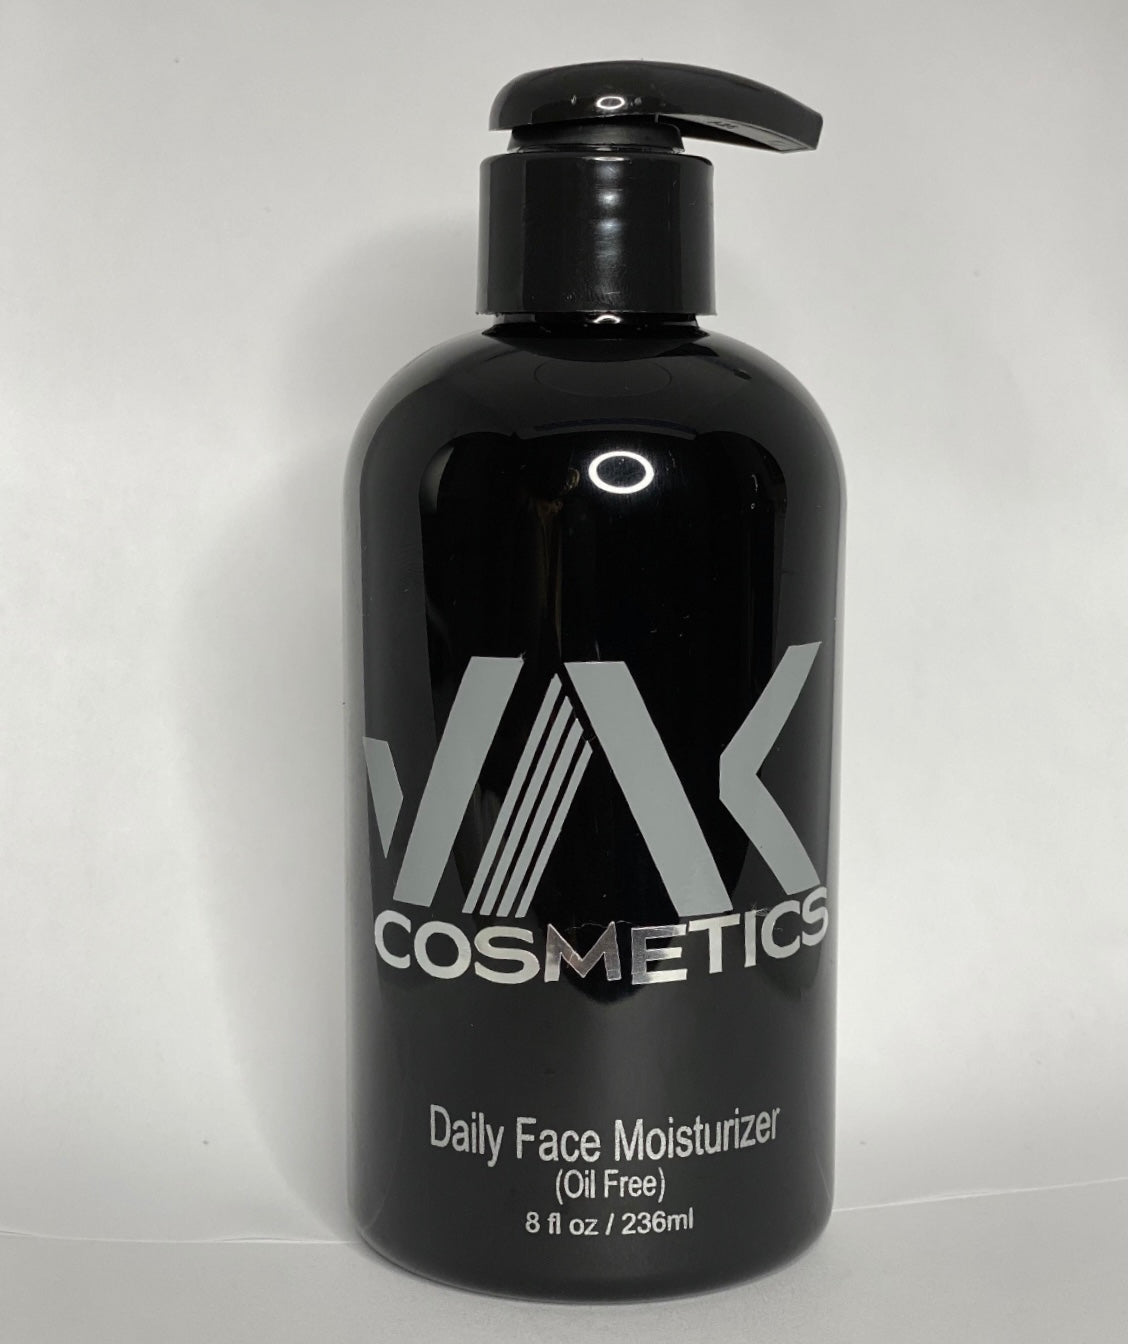 Daily Face Moisturizer Oil Free